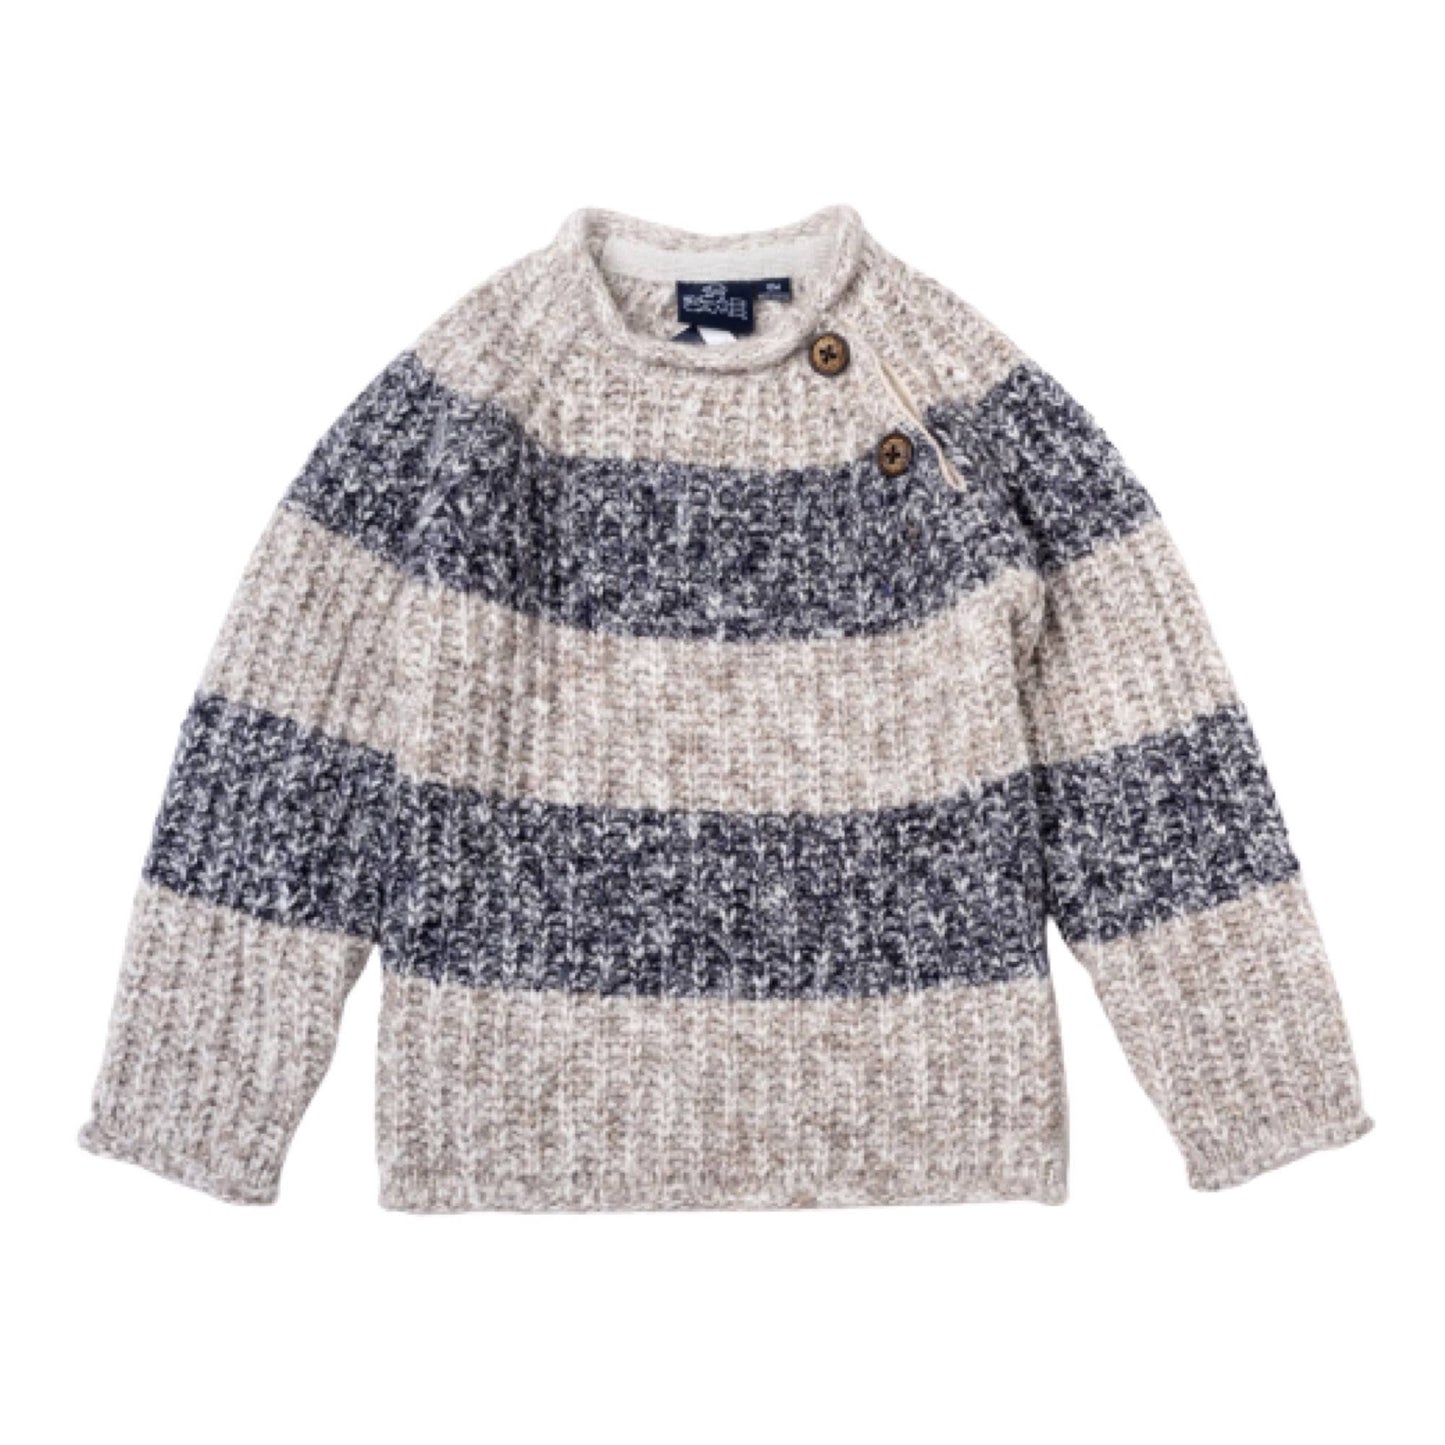 Chunky Knit Sweater - Toddler